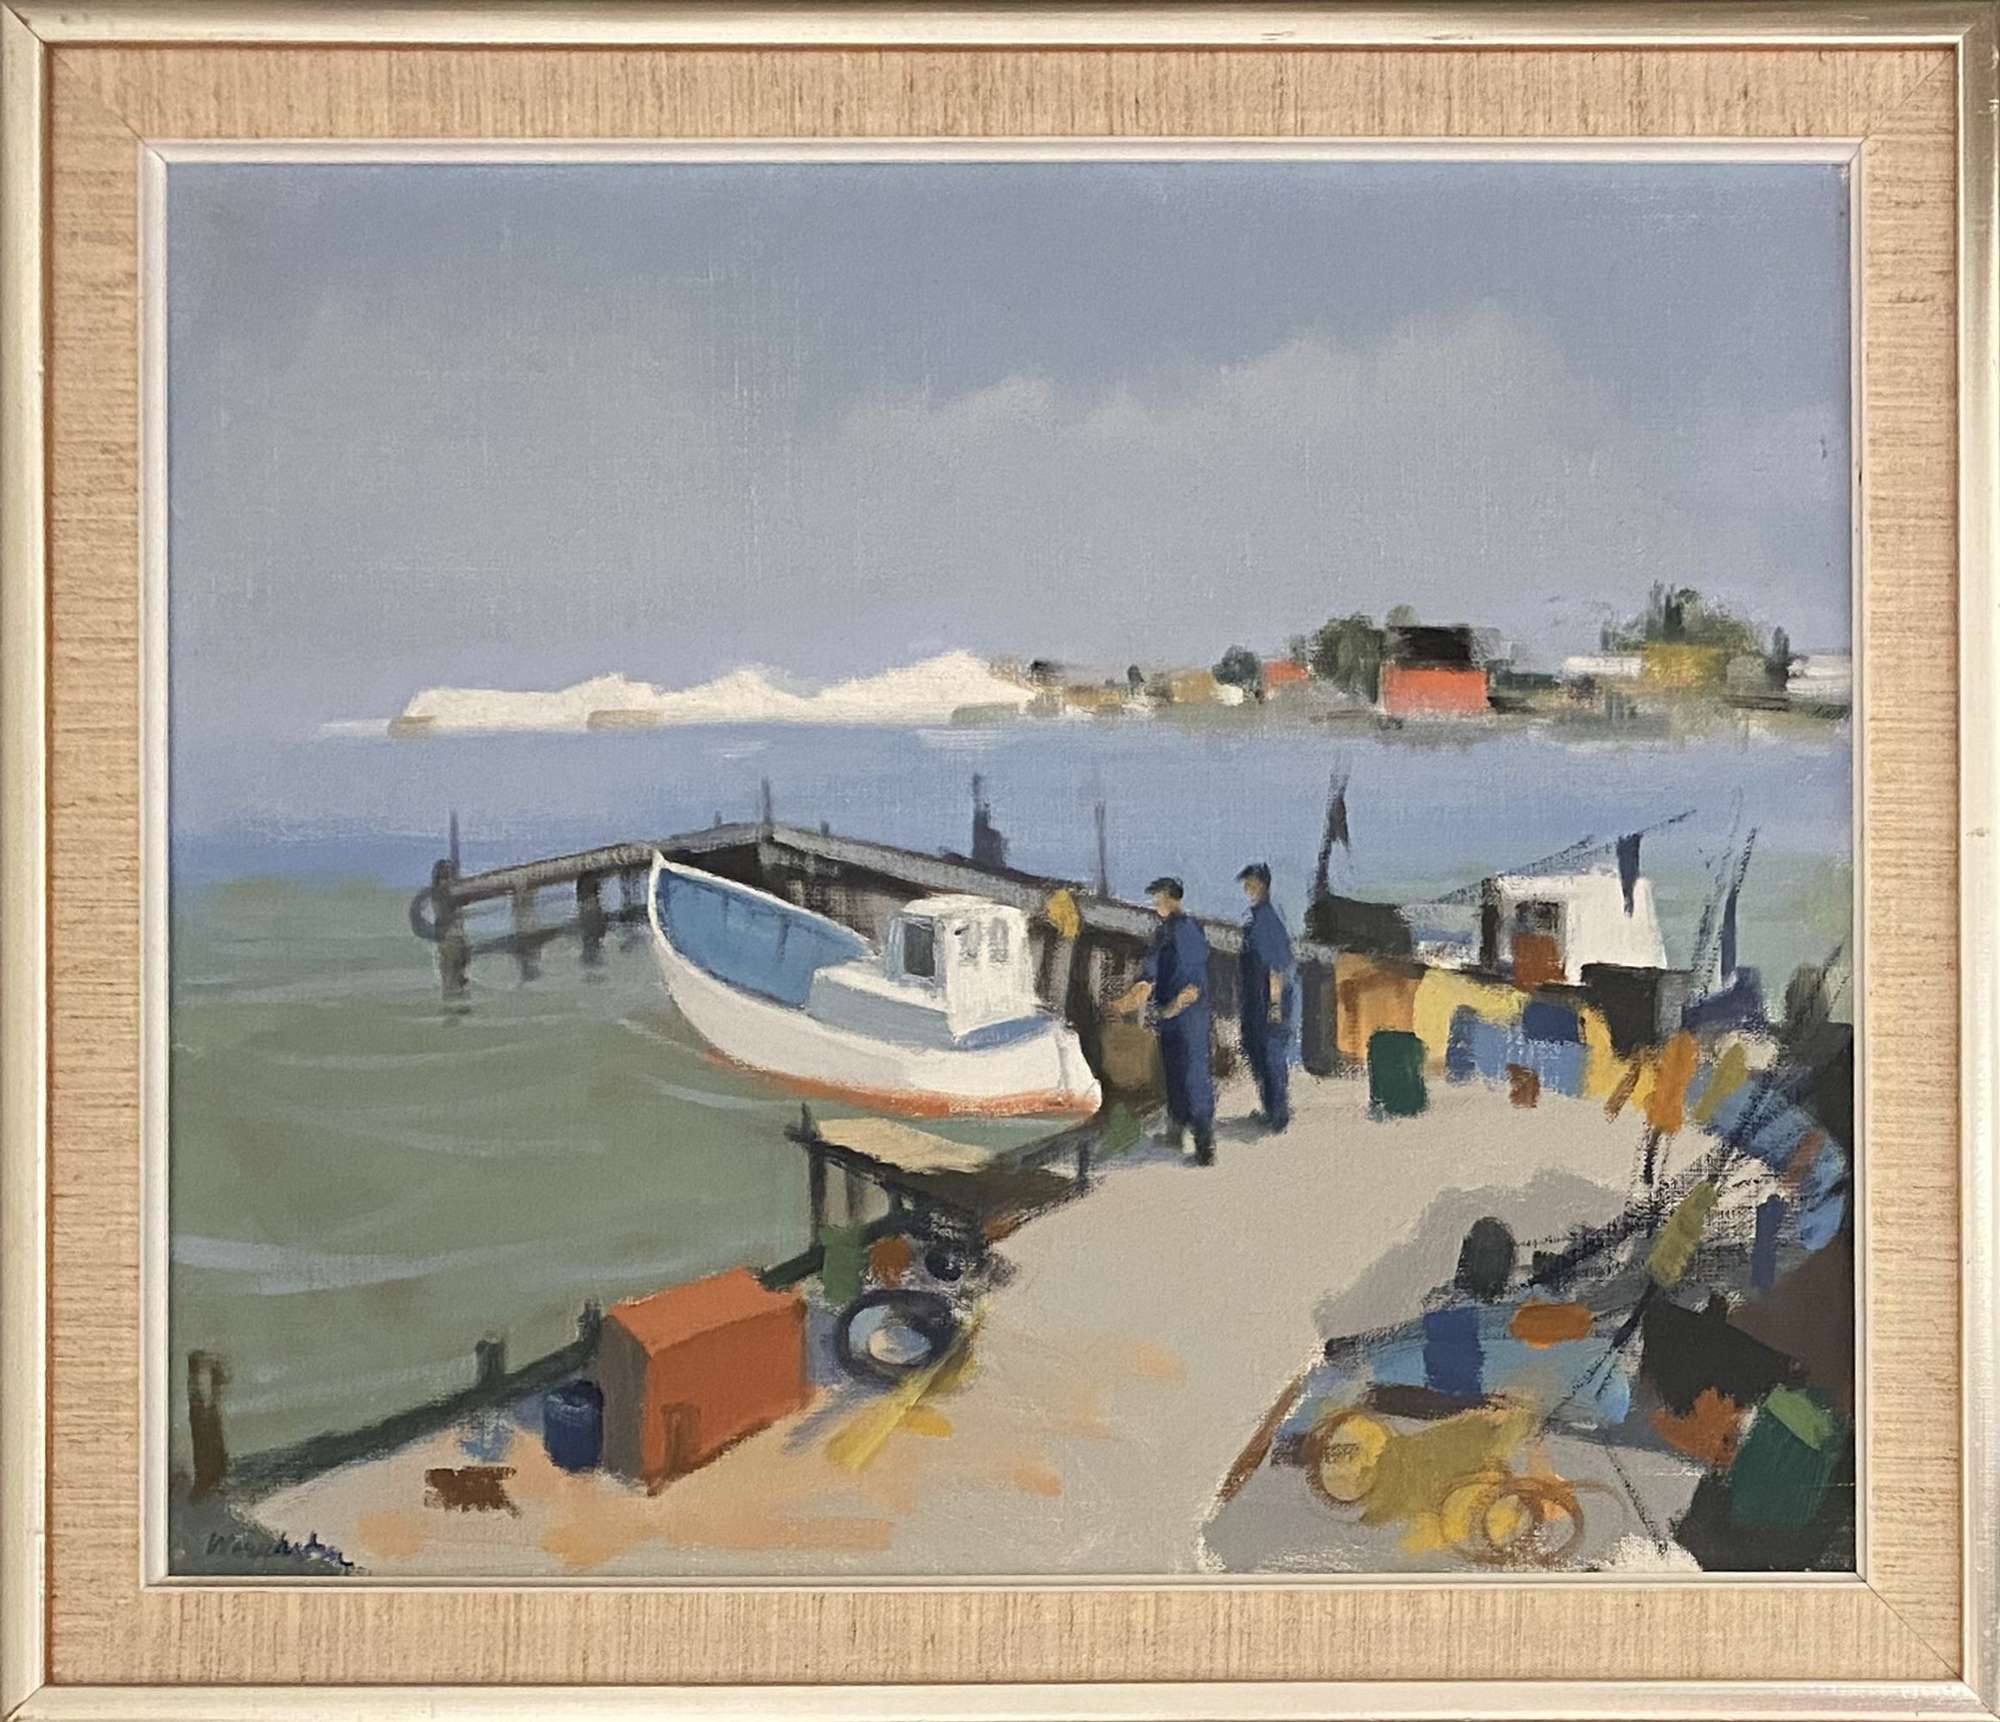 March Auction 24 'two Fishermen At A Jetty'